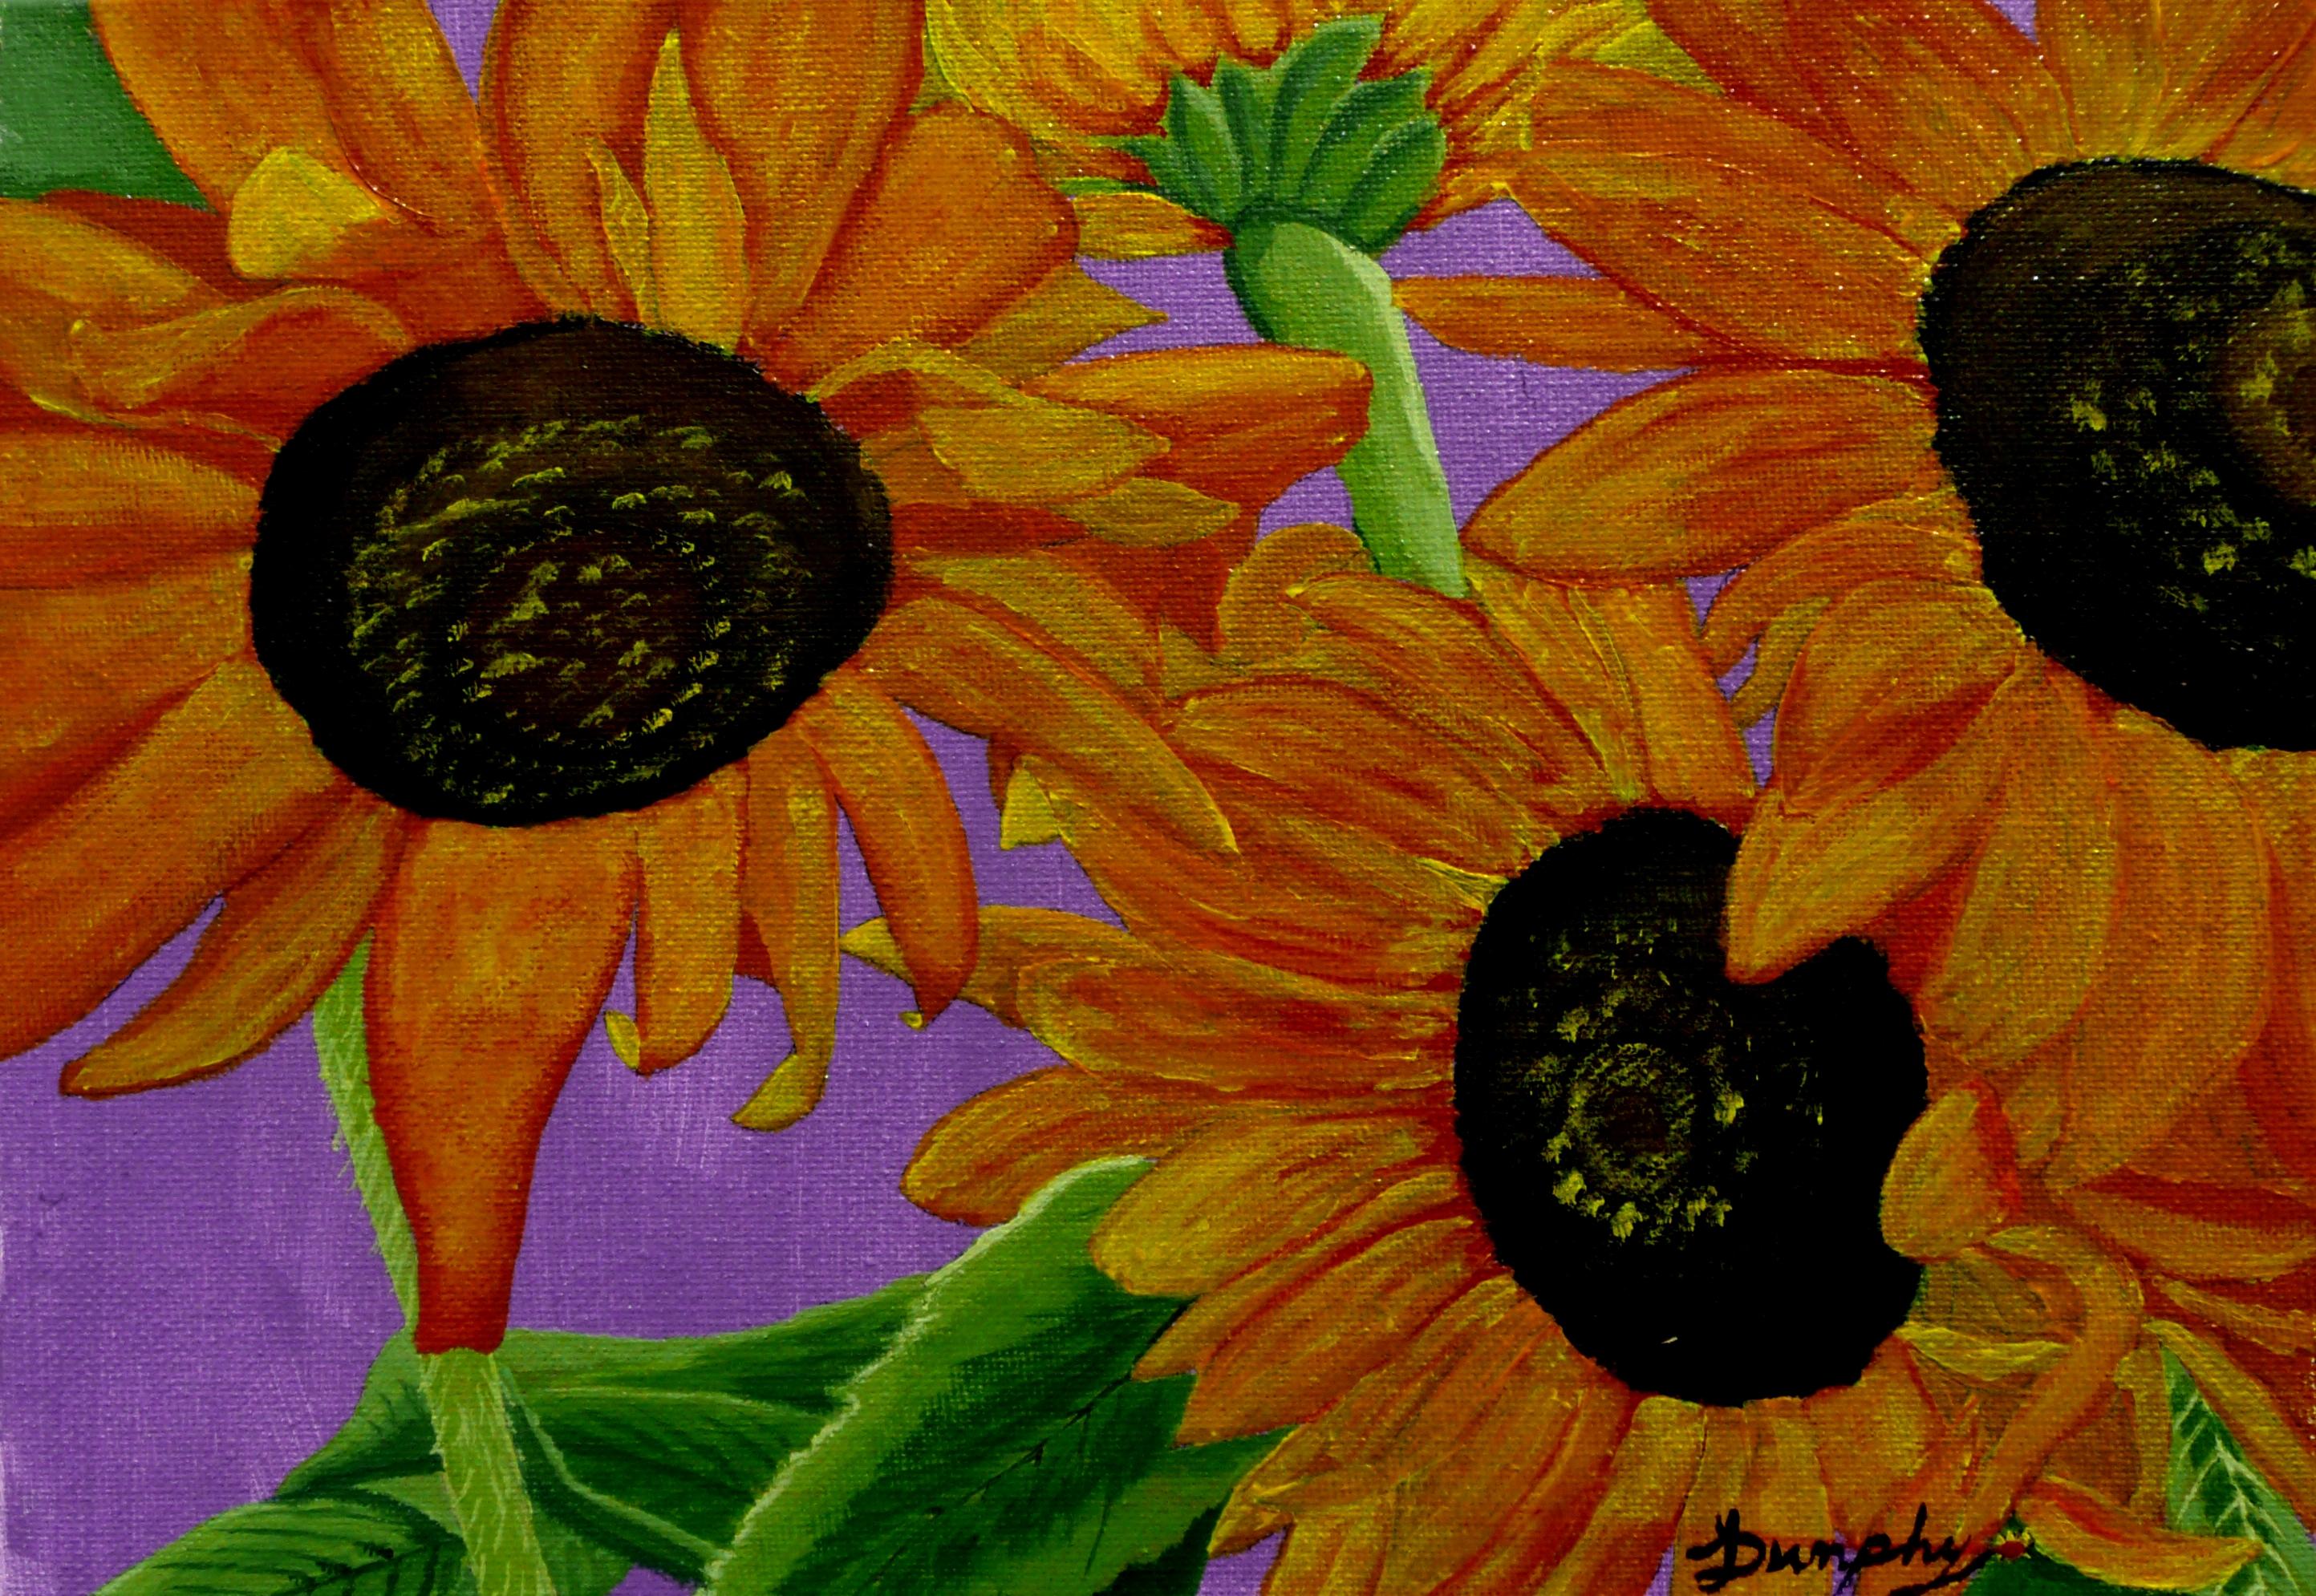 A vibrant painting of that well known artistic subject, the Sunflower. This brilliant painting will bring light and happiness to any decor. It has been created in professional grade acrylics on stretched canvas. It is 9X12 inches or 22X30